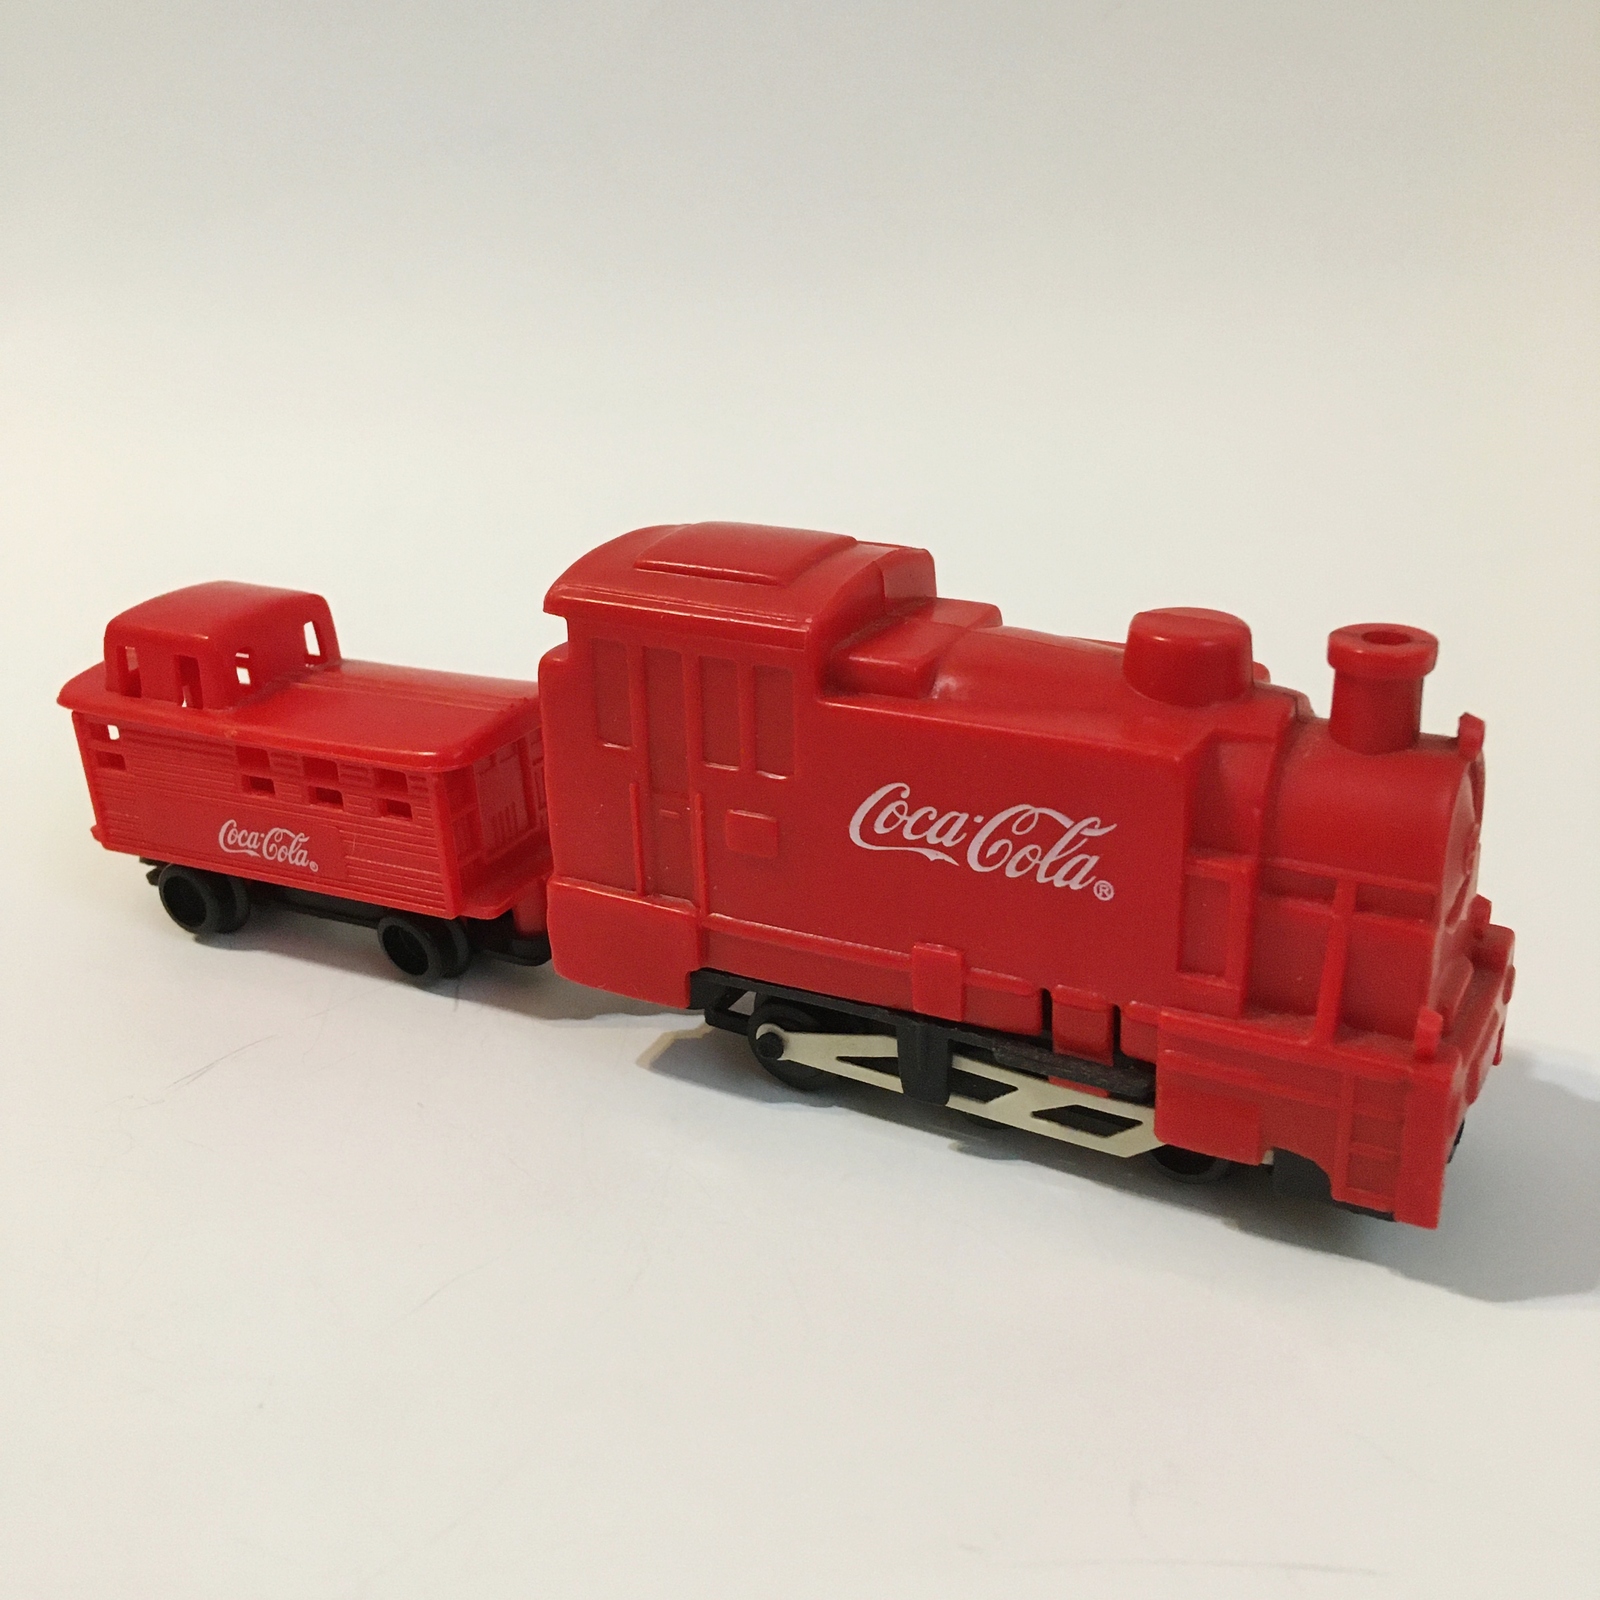 Primary image for Coca Cola Red Toy Trains Set 2 Plastic Engine Passenger Collectible Advertising